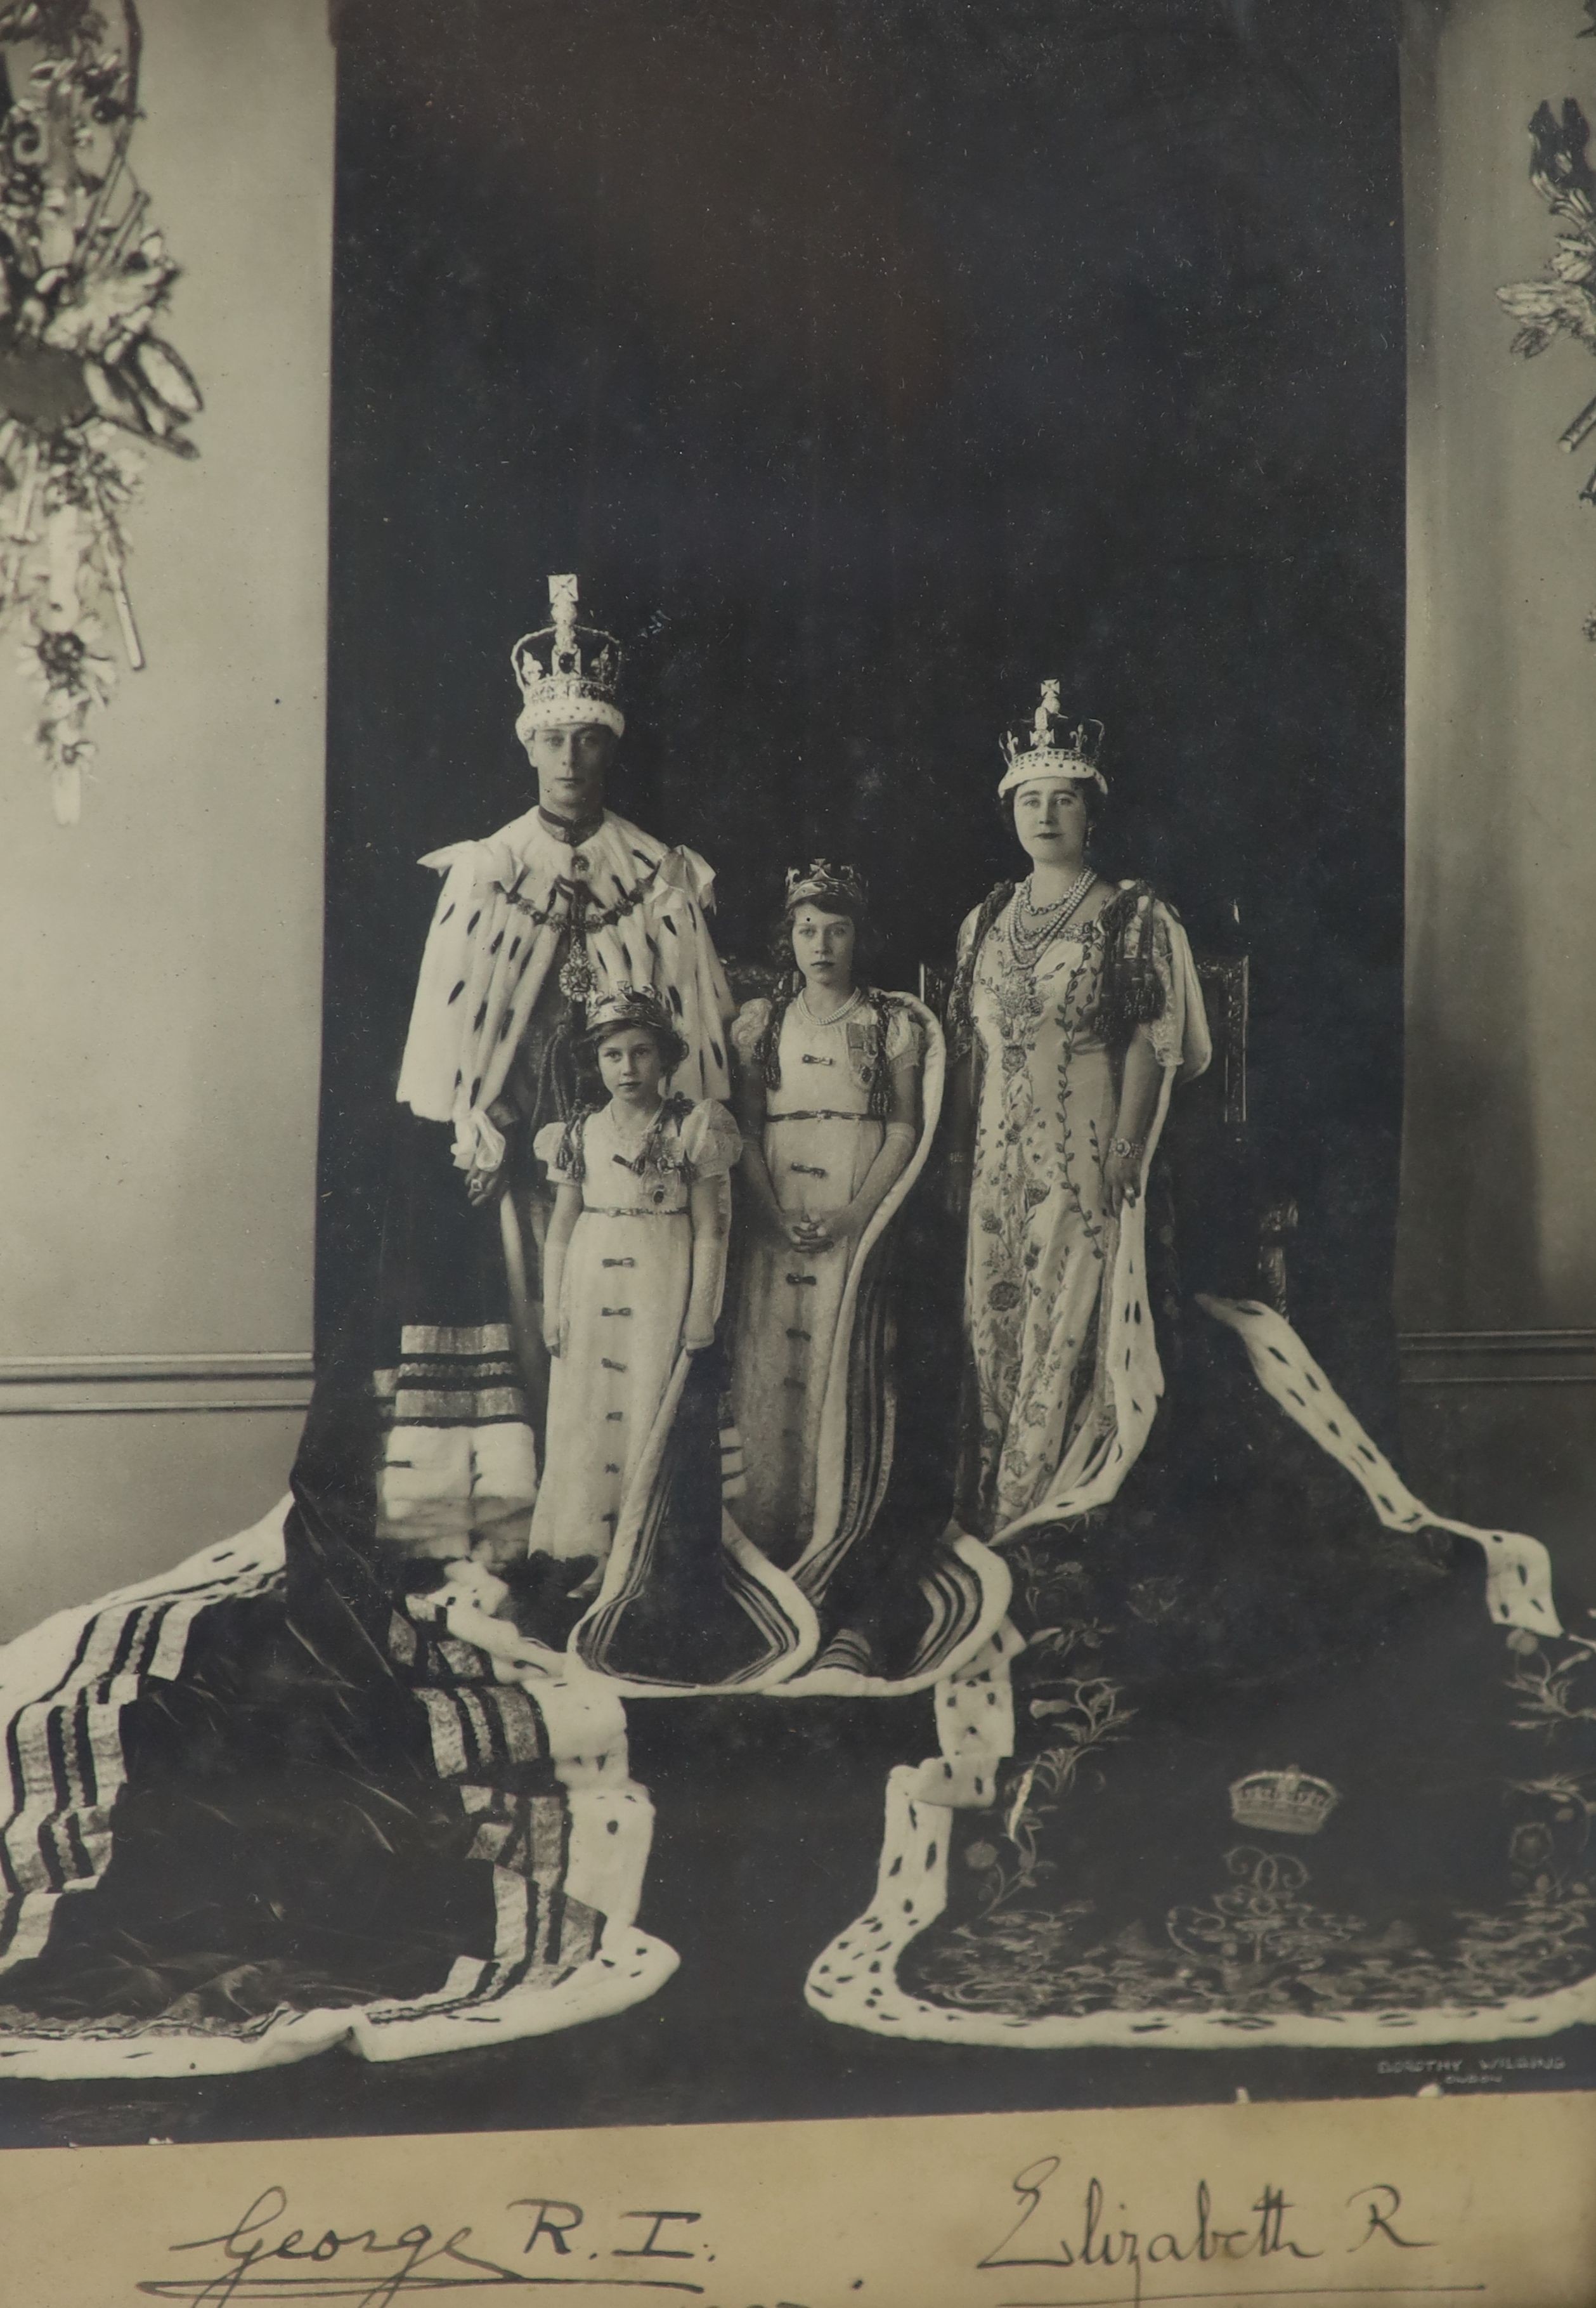 Royal Interest - a signed photograph of George VI, Queen Elizabeth and Princesses Elizabeth and Margaret in formal robes, dated 1937, Frame 32 x 24 cm